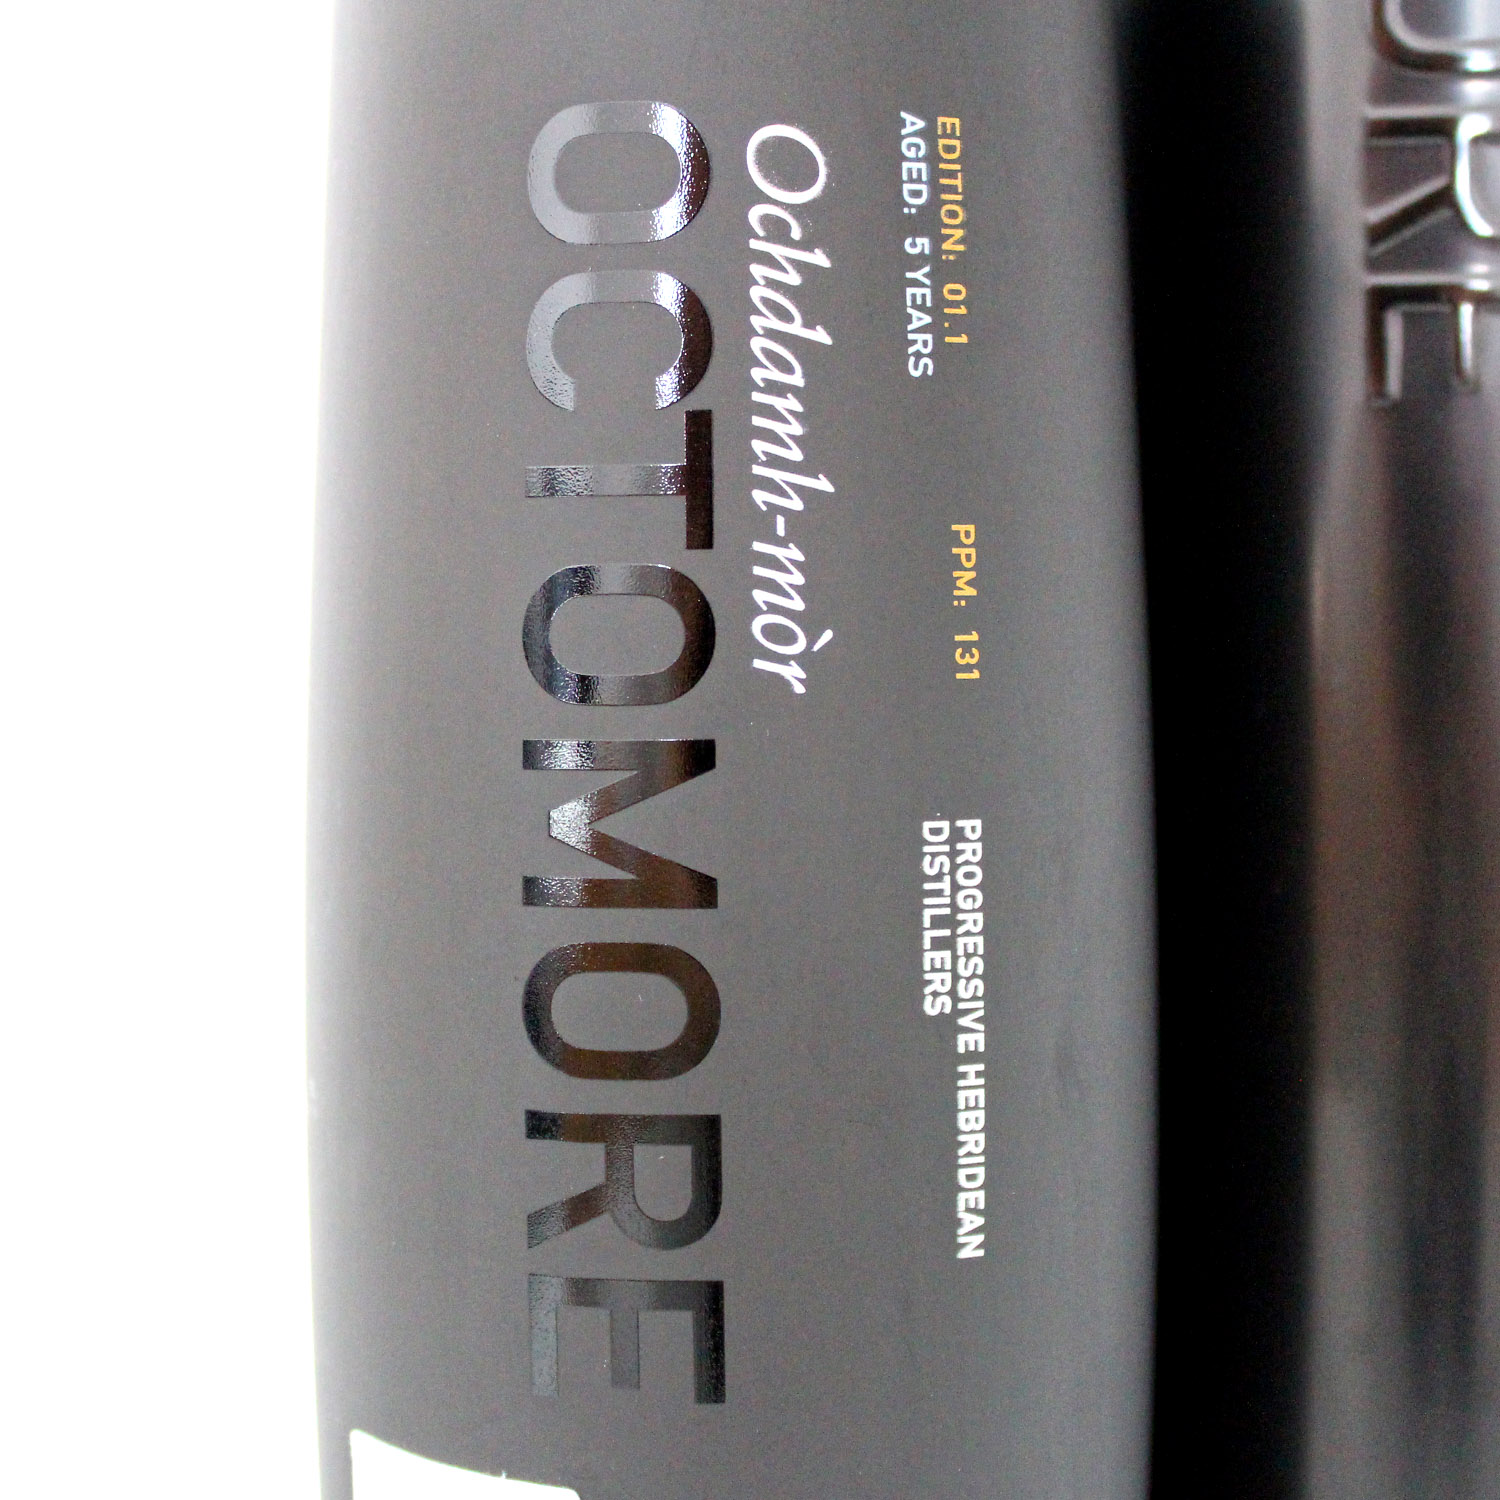 Bruichladdich Octomore 01.1 First Edition front